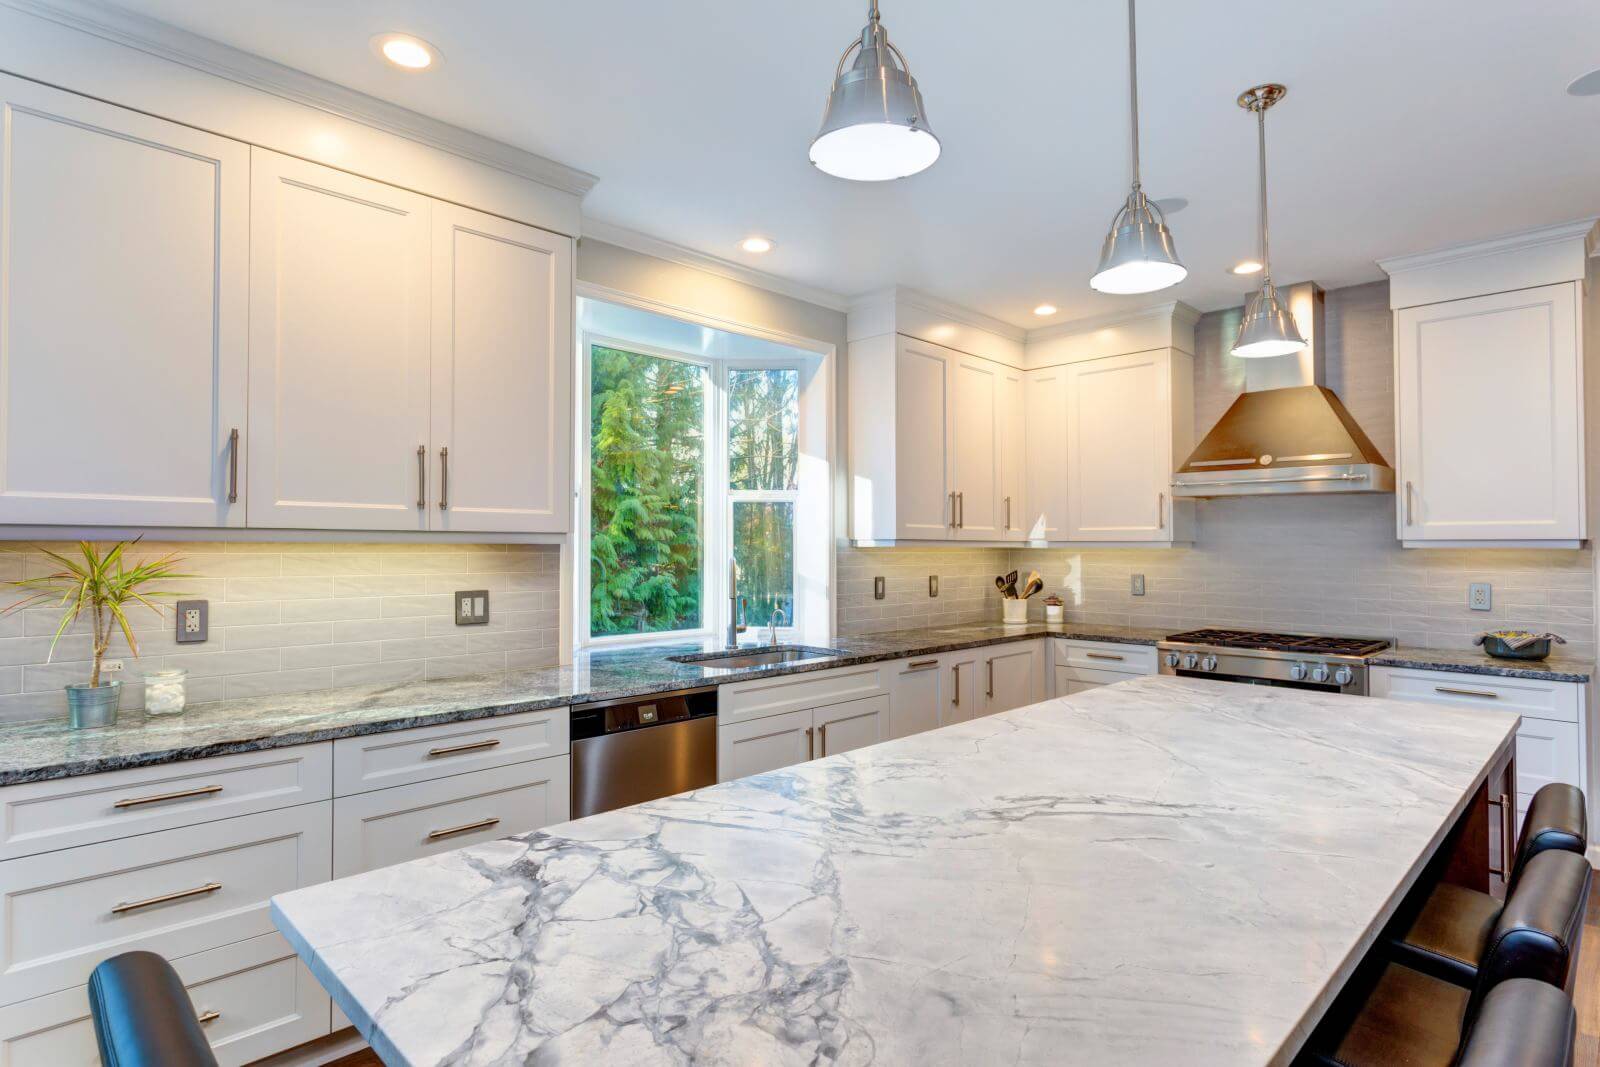 Luxury home interior boasts amazing white kitchen with custom white shaker cabinets, endless marble topped kitchen island and stainless steel appliances over wide planked hardwood floor.